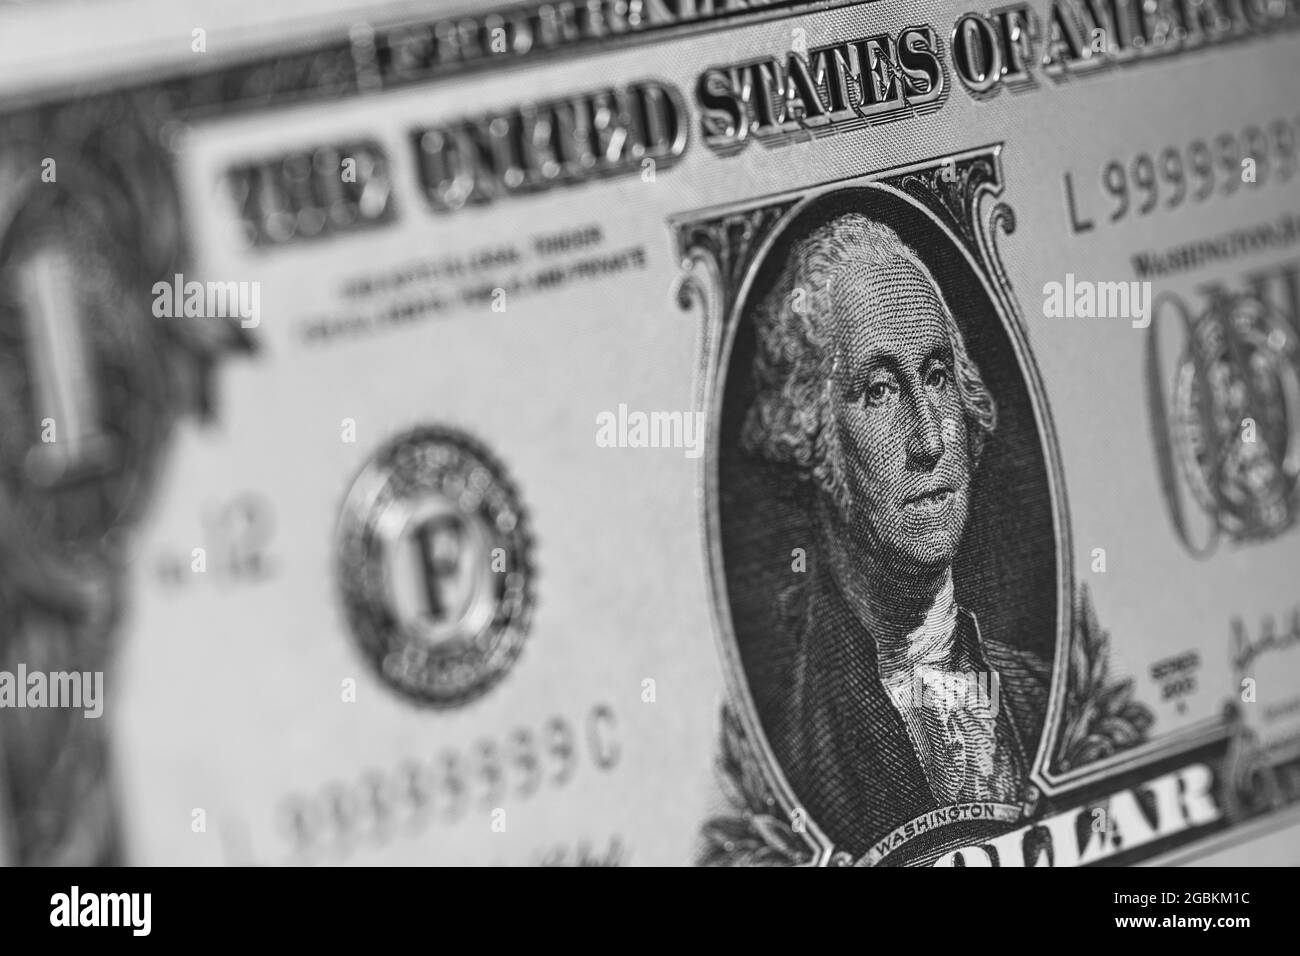 Closeup of front side of 1 dollar bill for design purpose Stock Photo